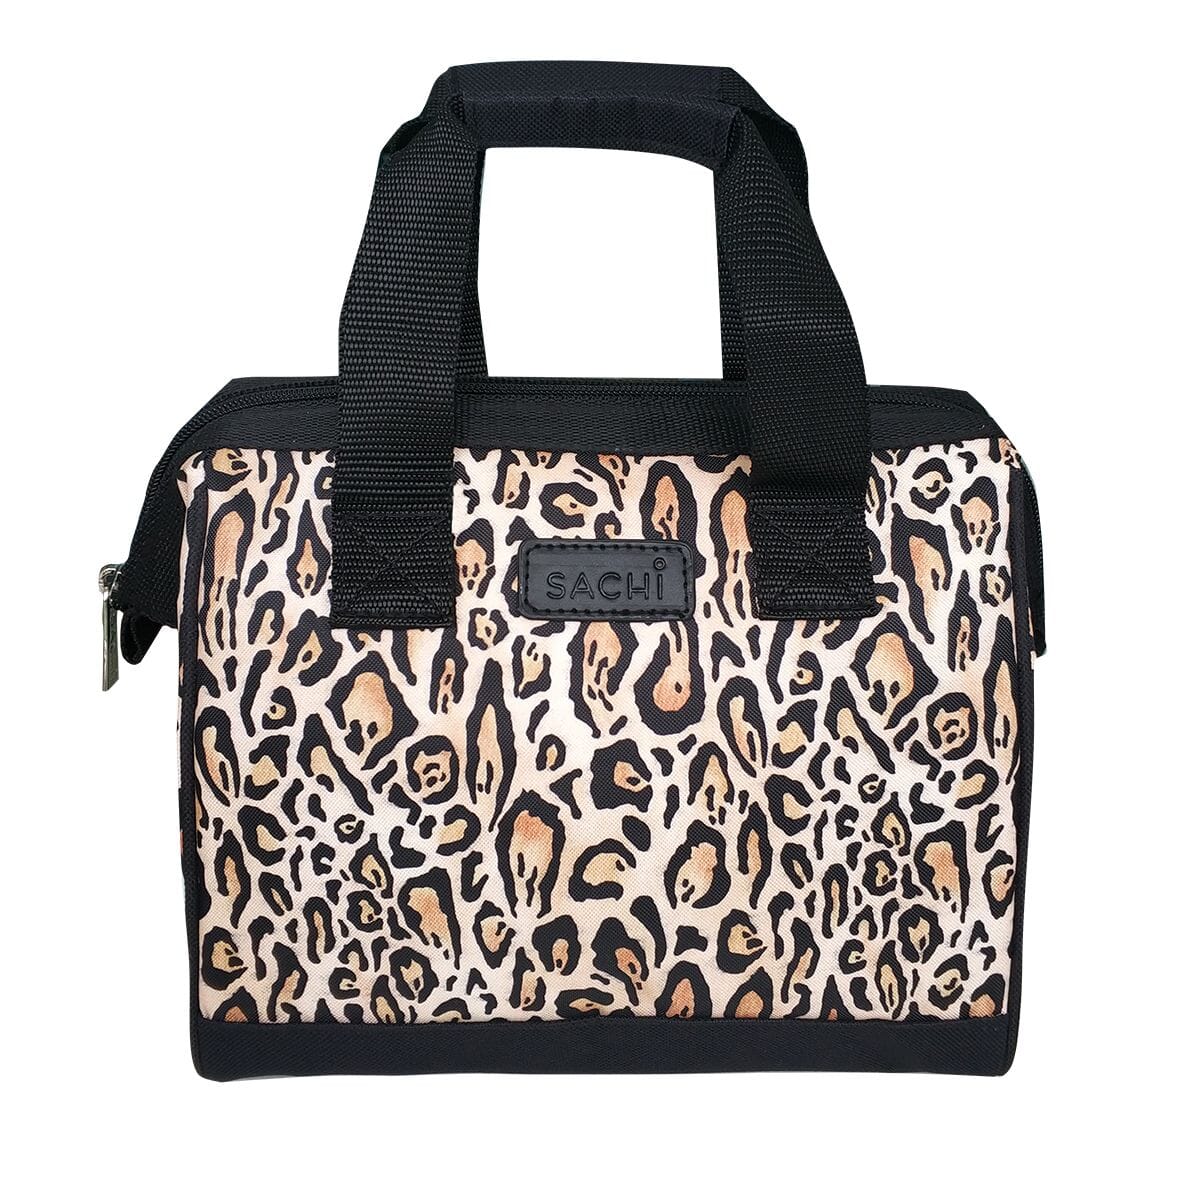 Insulated Lunch Bag - Leopard Print Sachi 